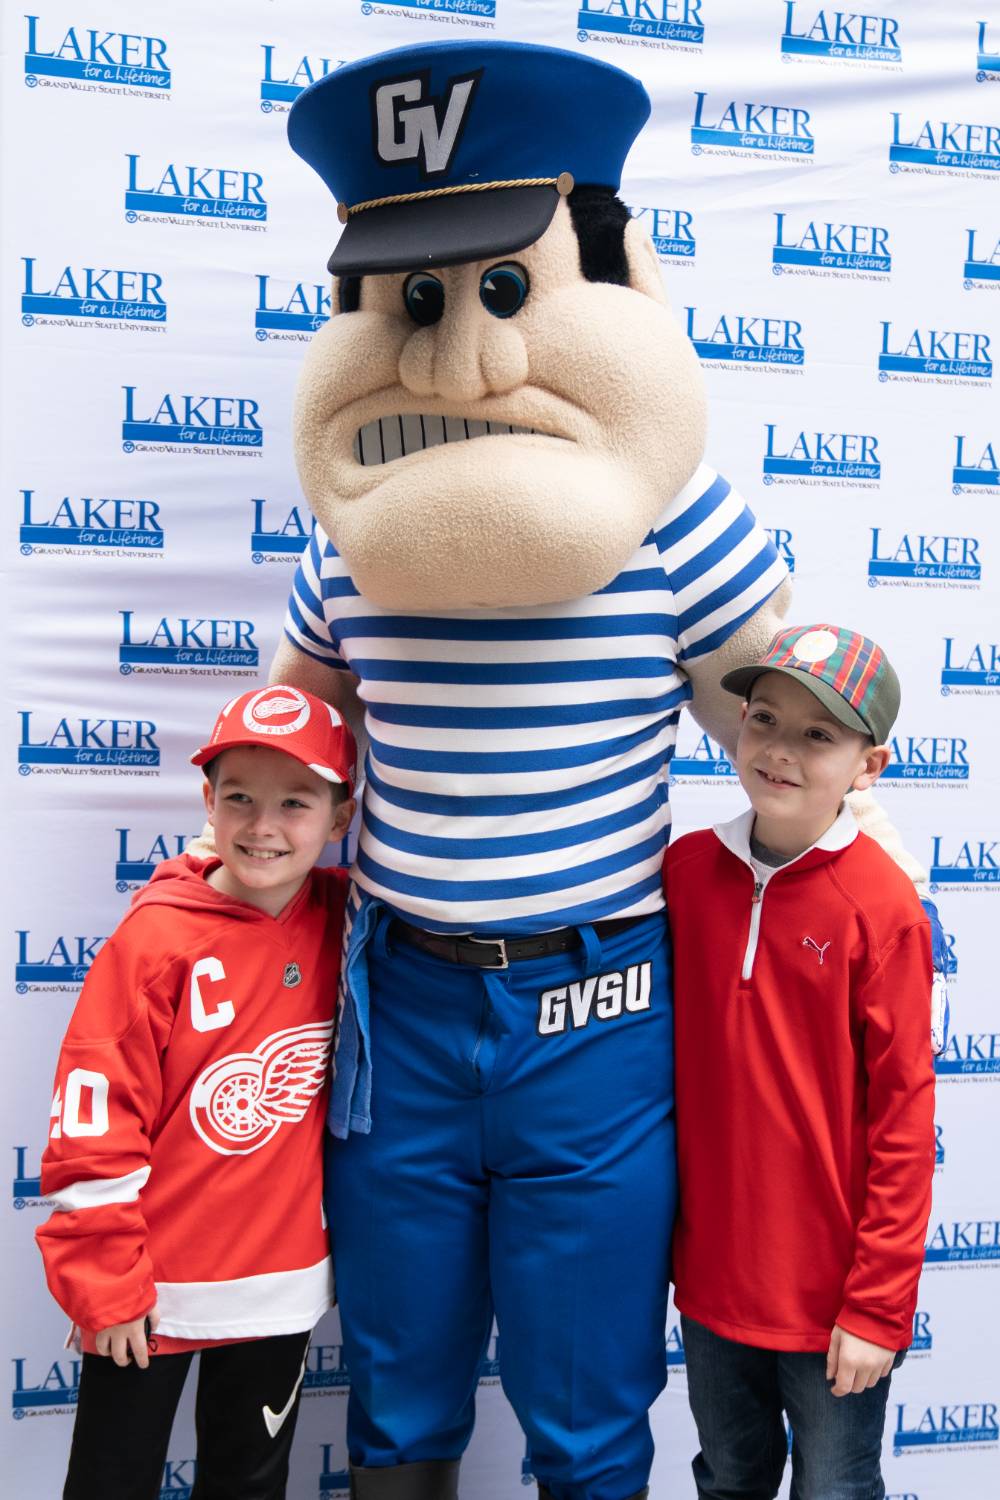 Louie the Laker poses with two young boys